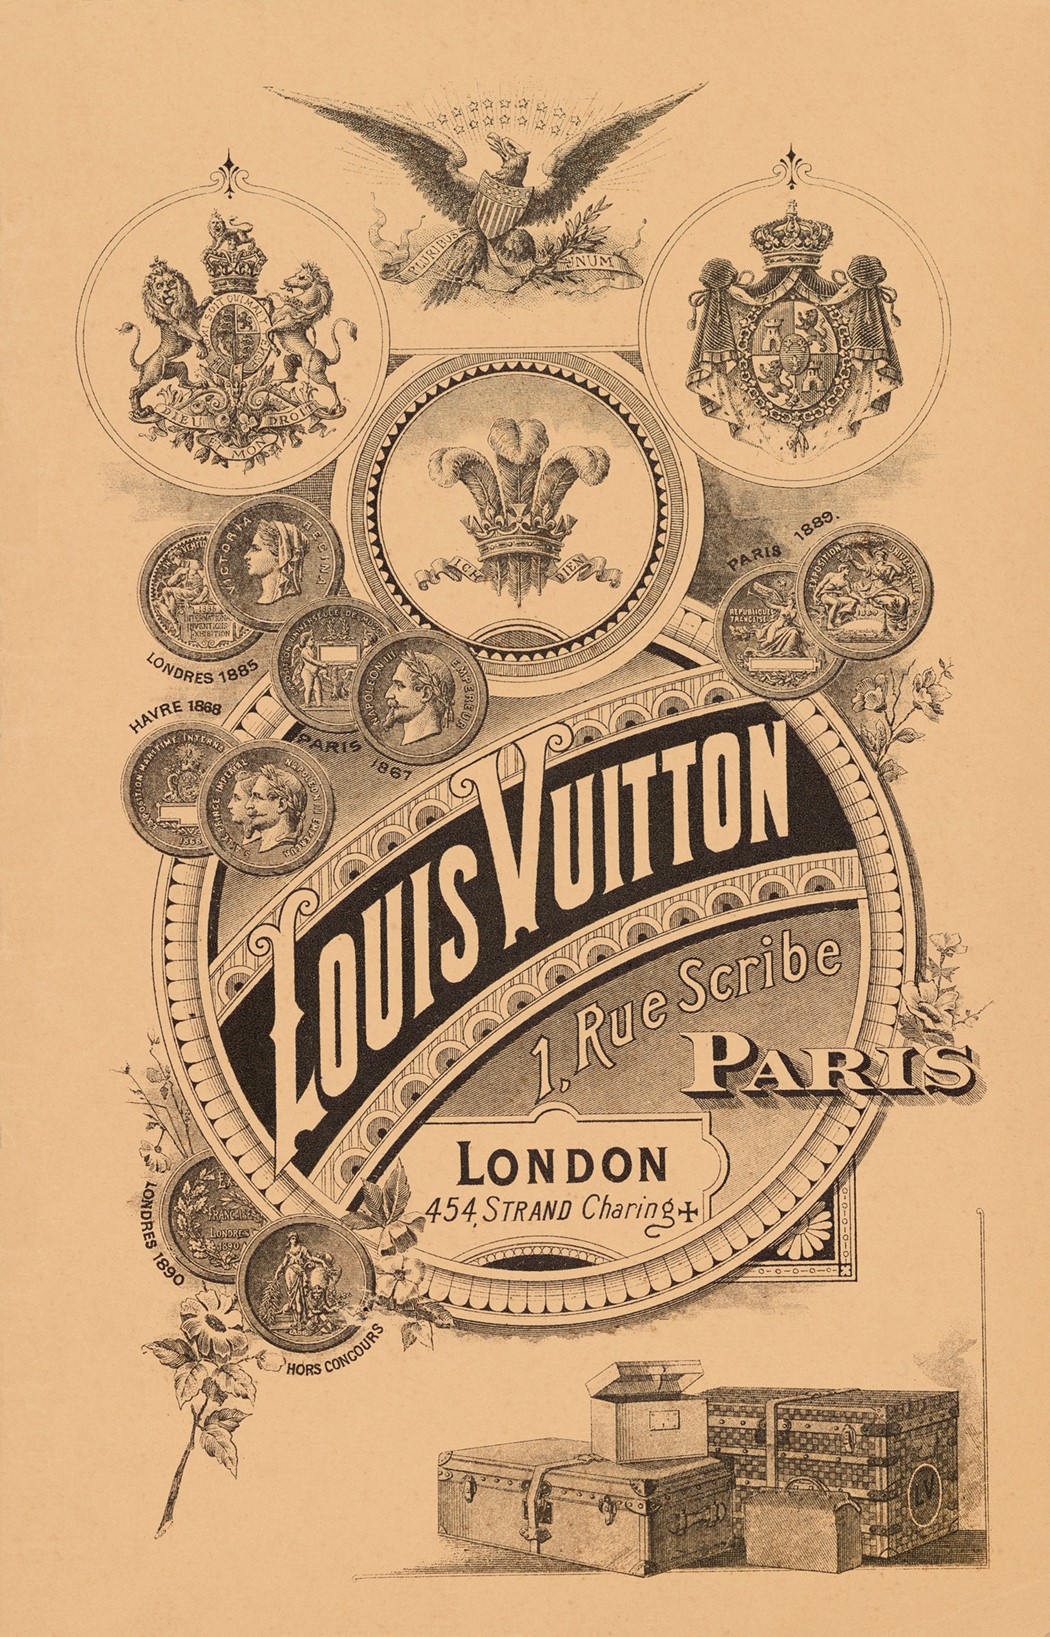 Louis Vuitton product catalogue cover. London 1892. Would love this framed!